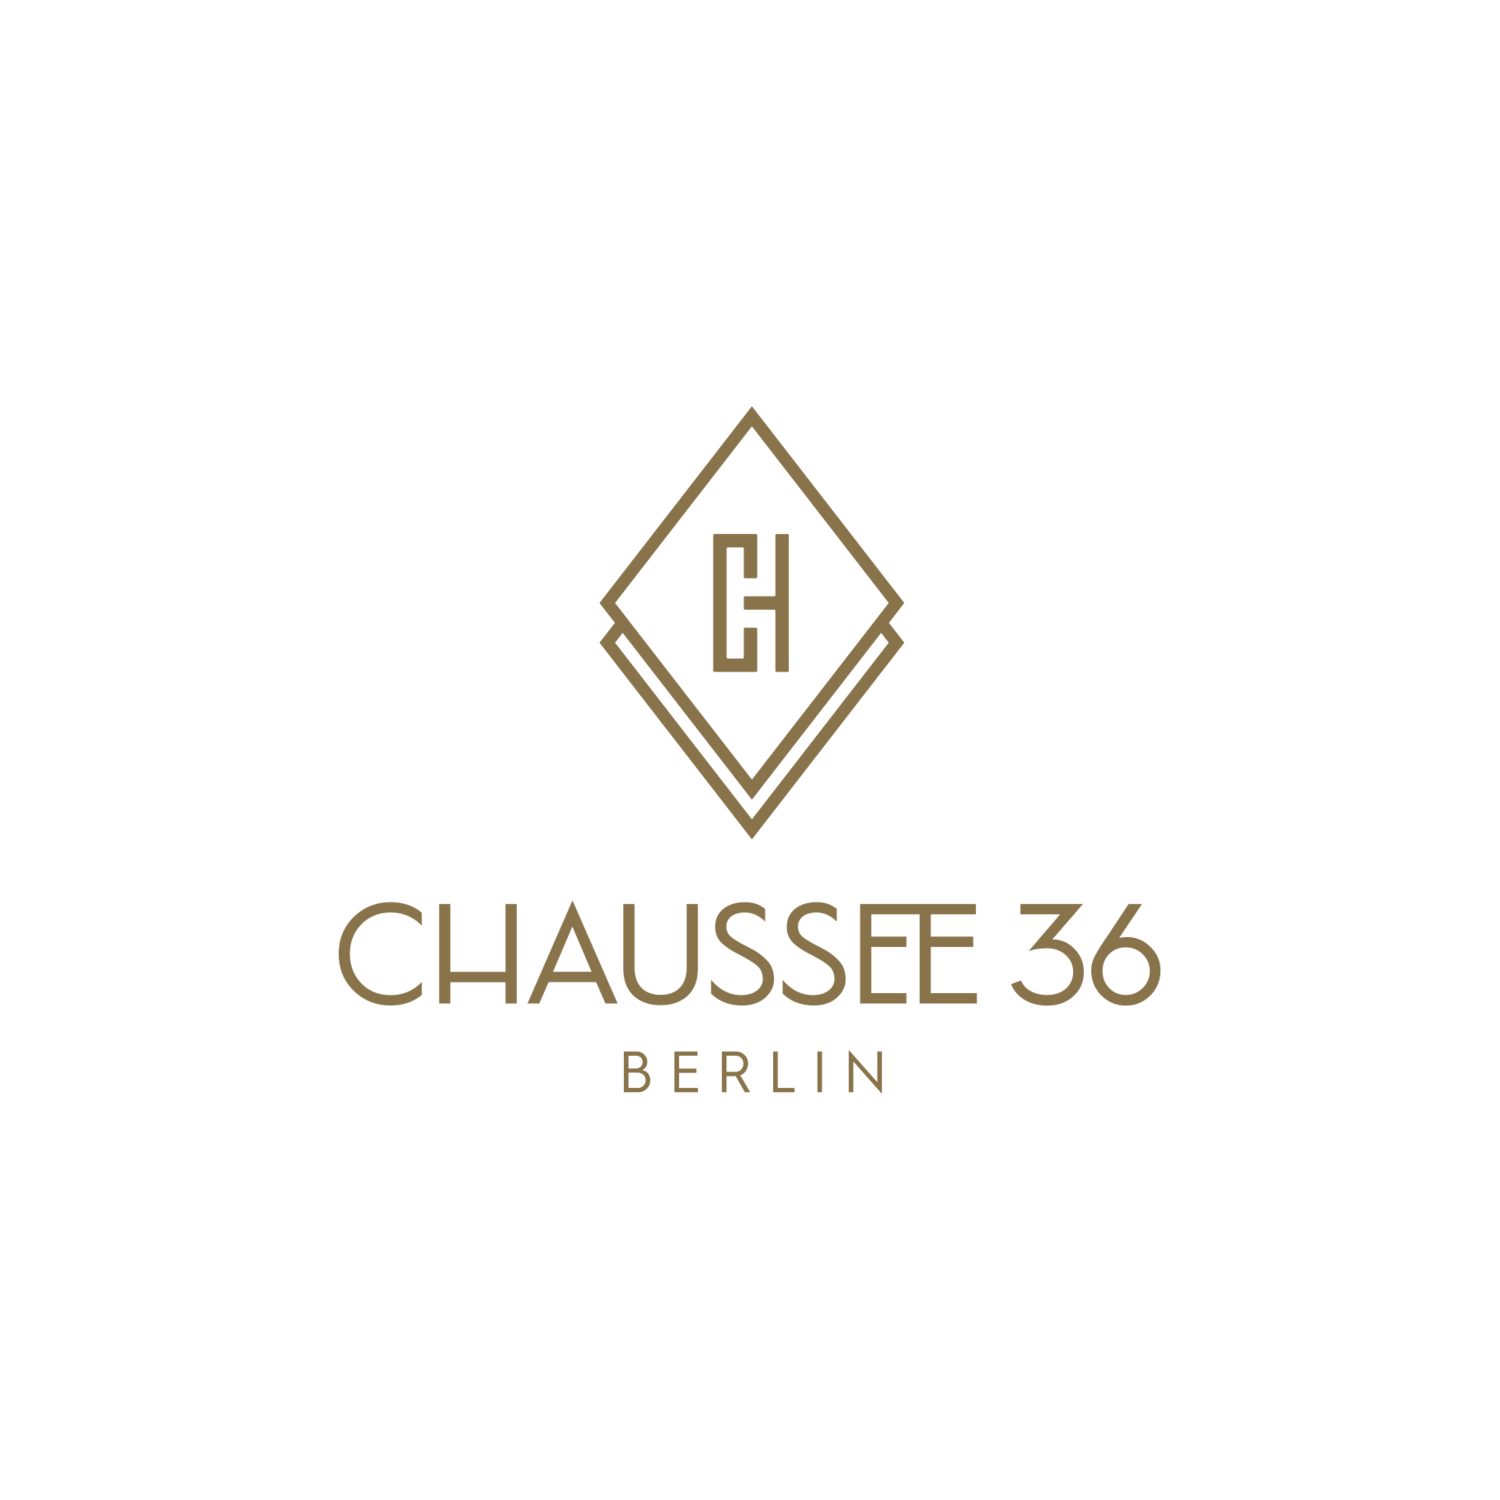 Chaussee 36